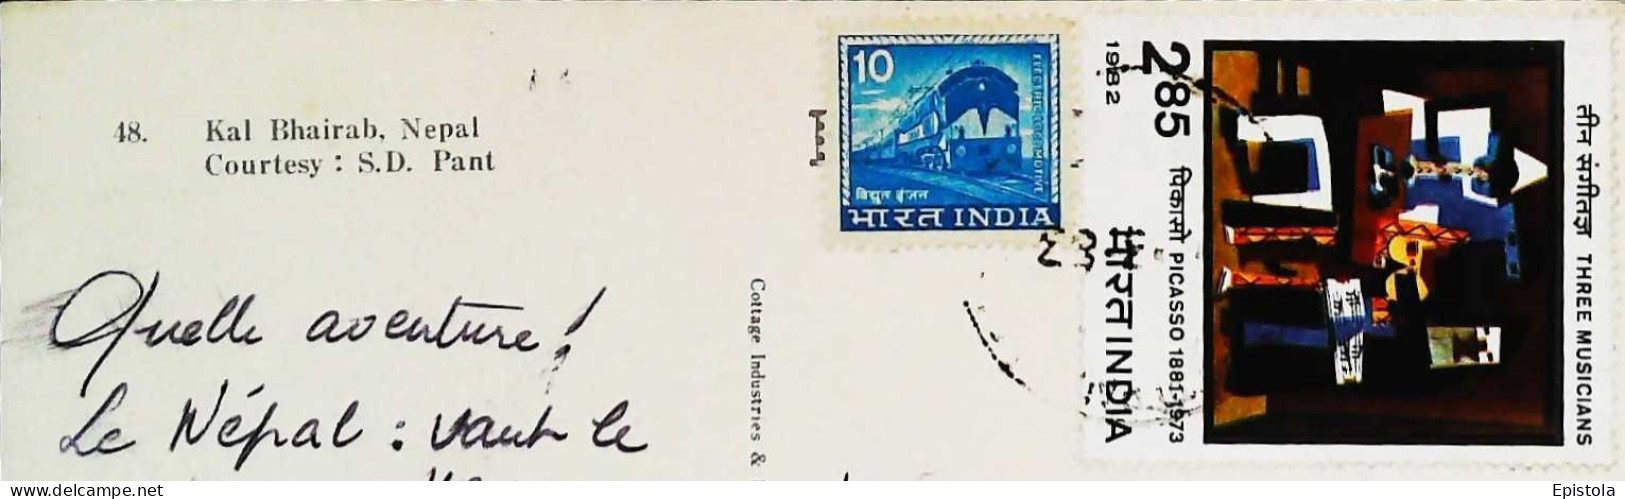 ►   Nepal Kal Bhairab   Courtesy  S D Pant   Stamp  Timbre 1973  Picasso - Népal